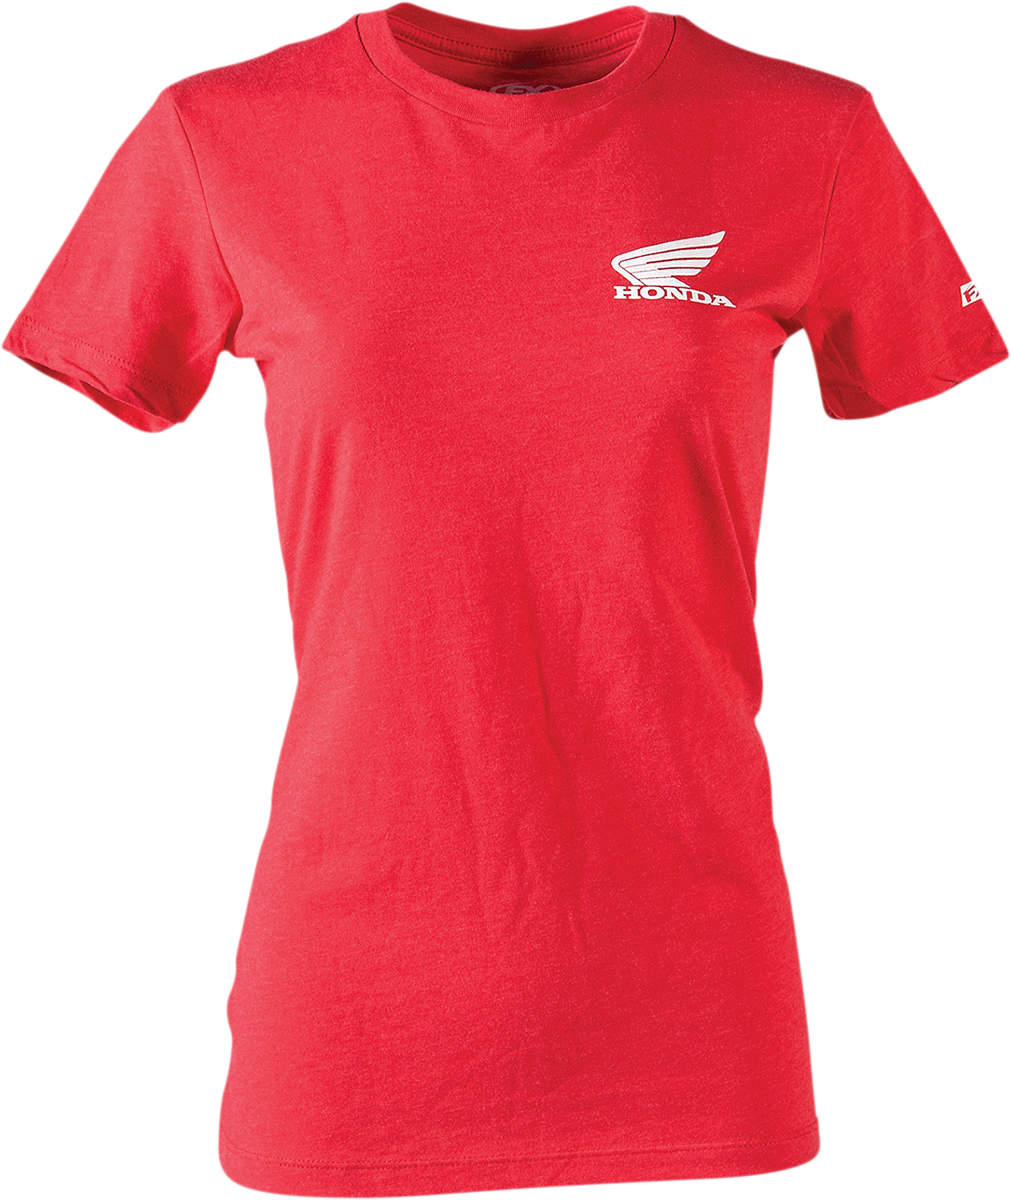 FACTORY EFFEX Women's Honda Icon T-Shirt - Red - Large 24-87314